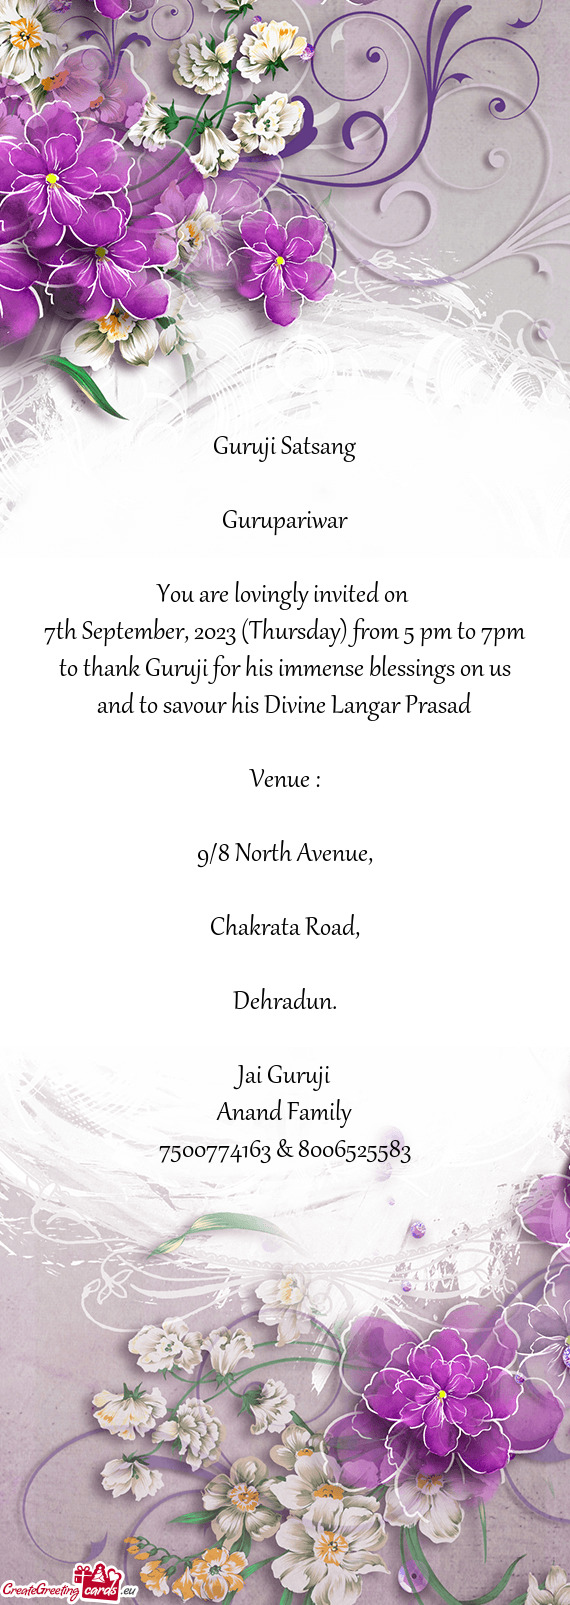 7th September, 2023 (Thursday) from 5 pm to 7pm